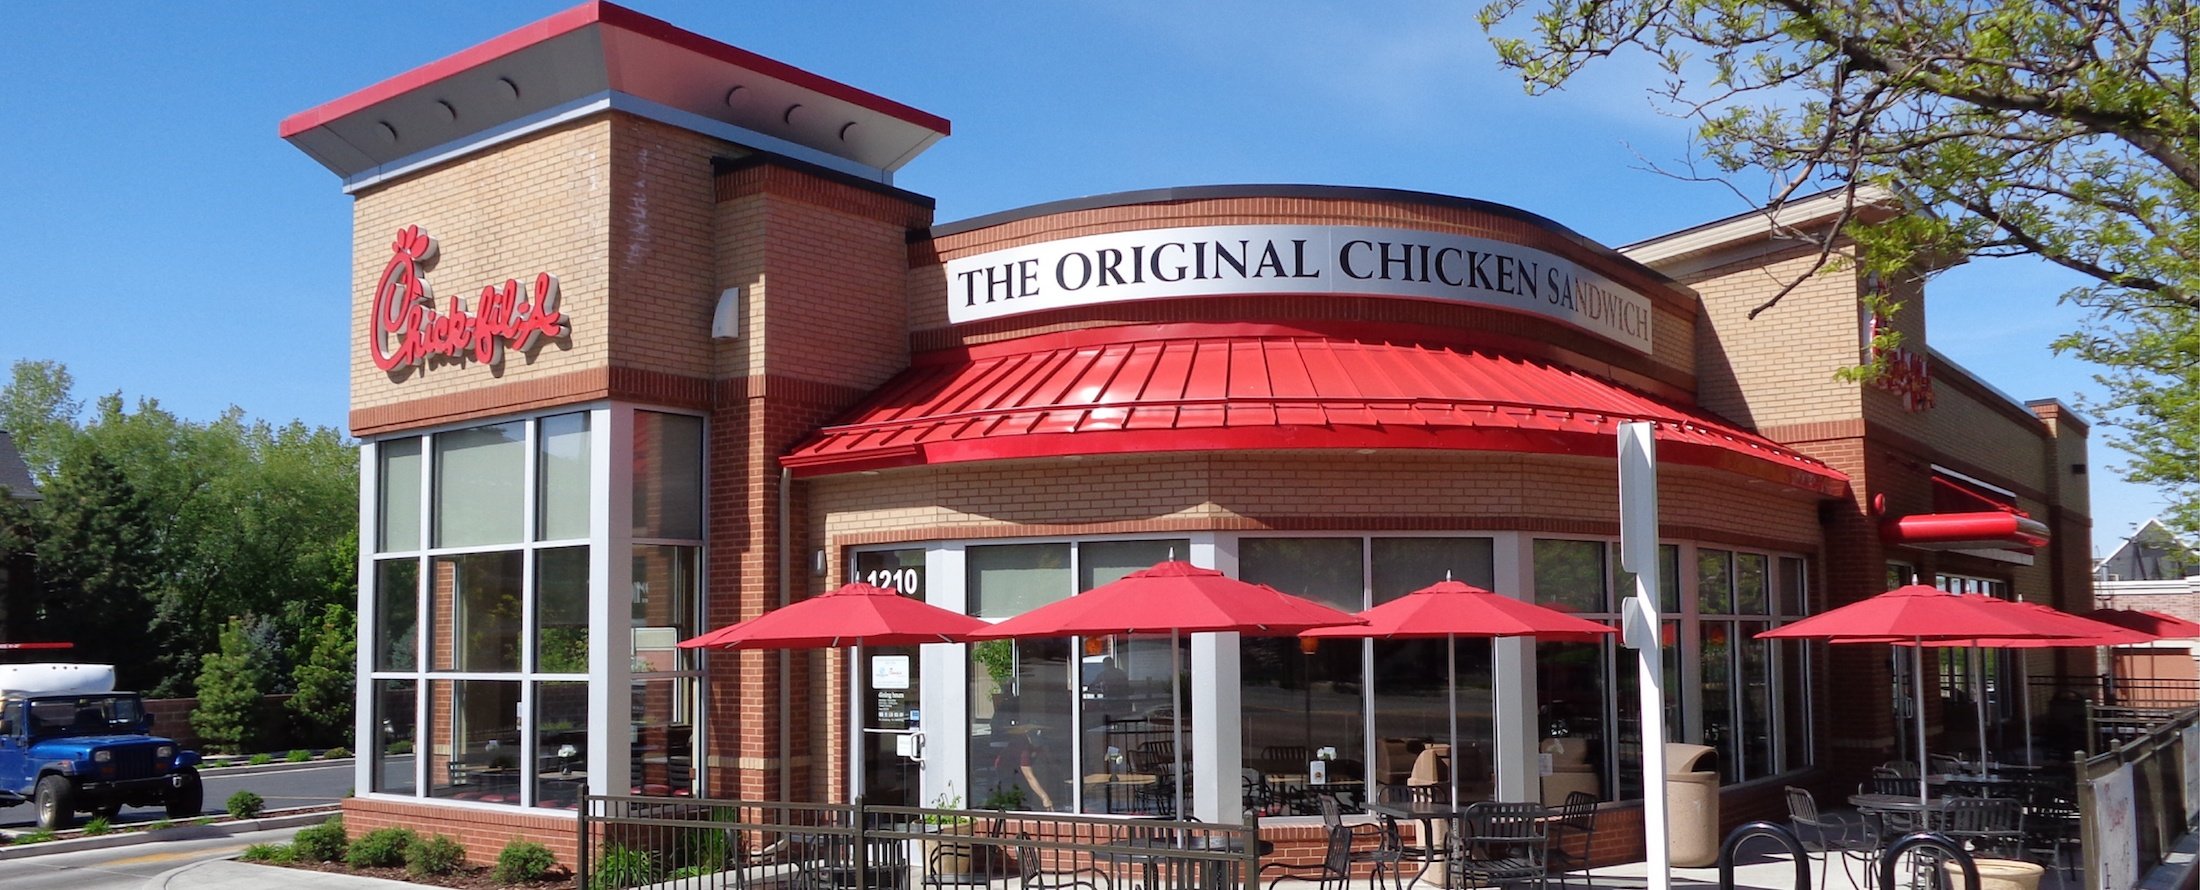 Lessons Learned From Chic Fil A